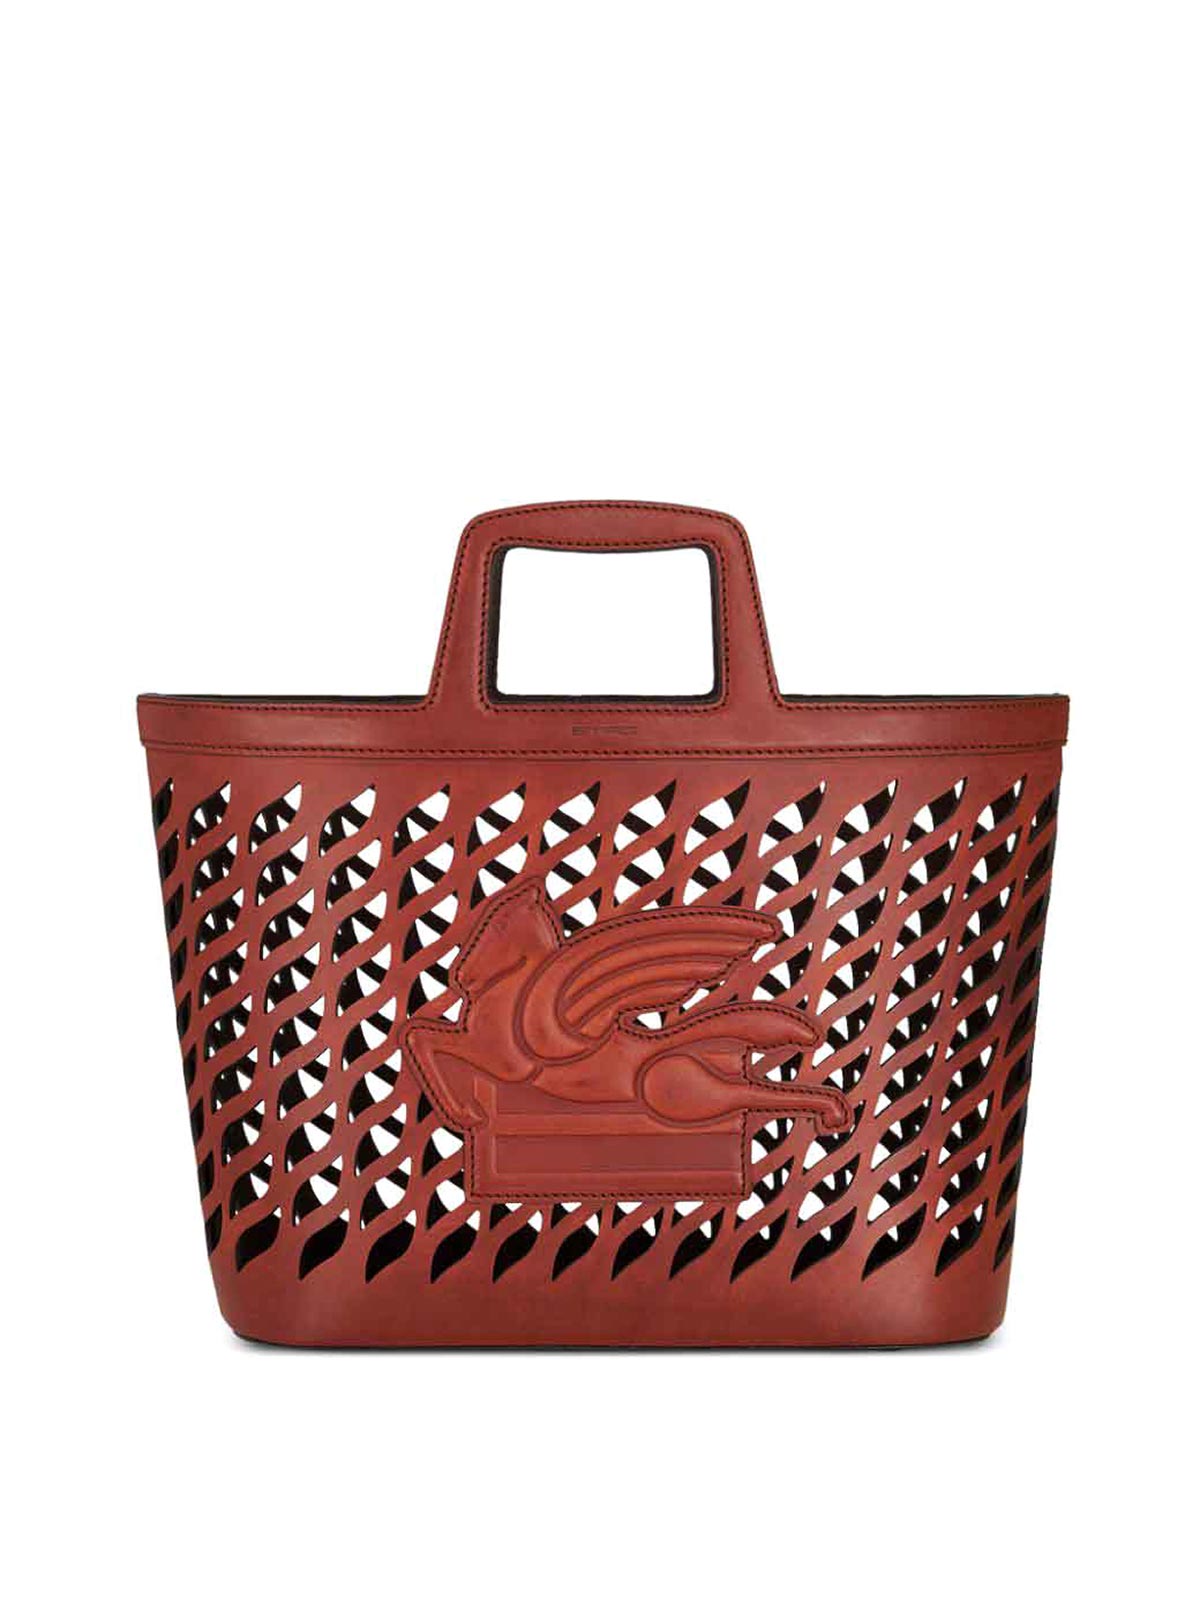 Etro Perforated Leather Shopping Bag In Brown